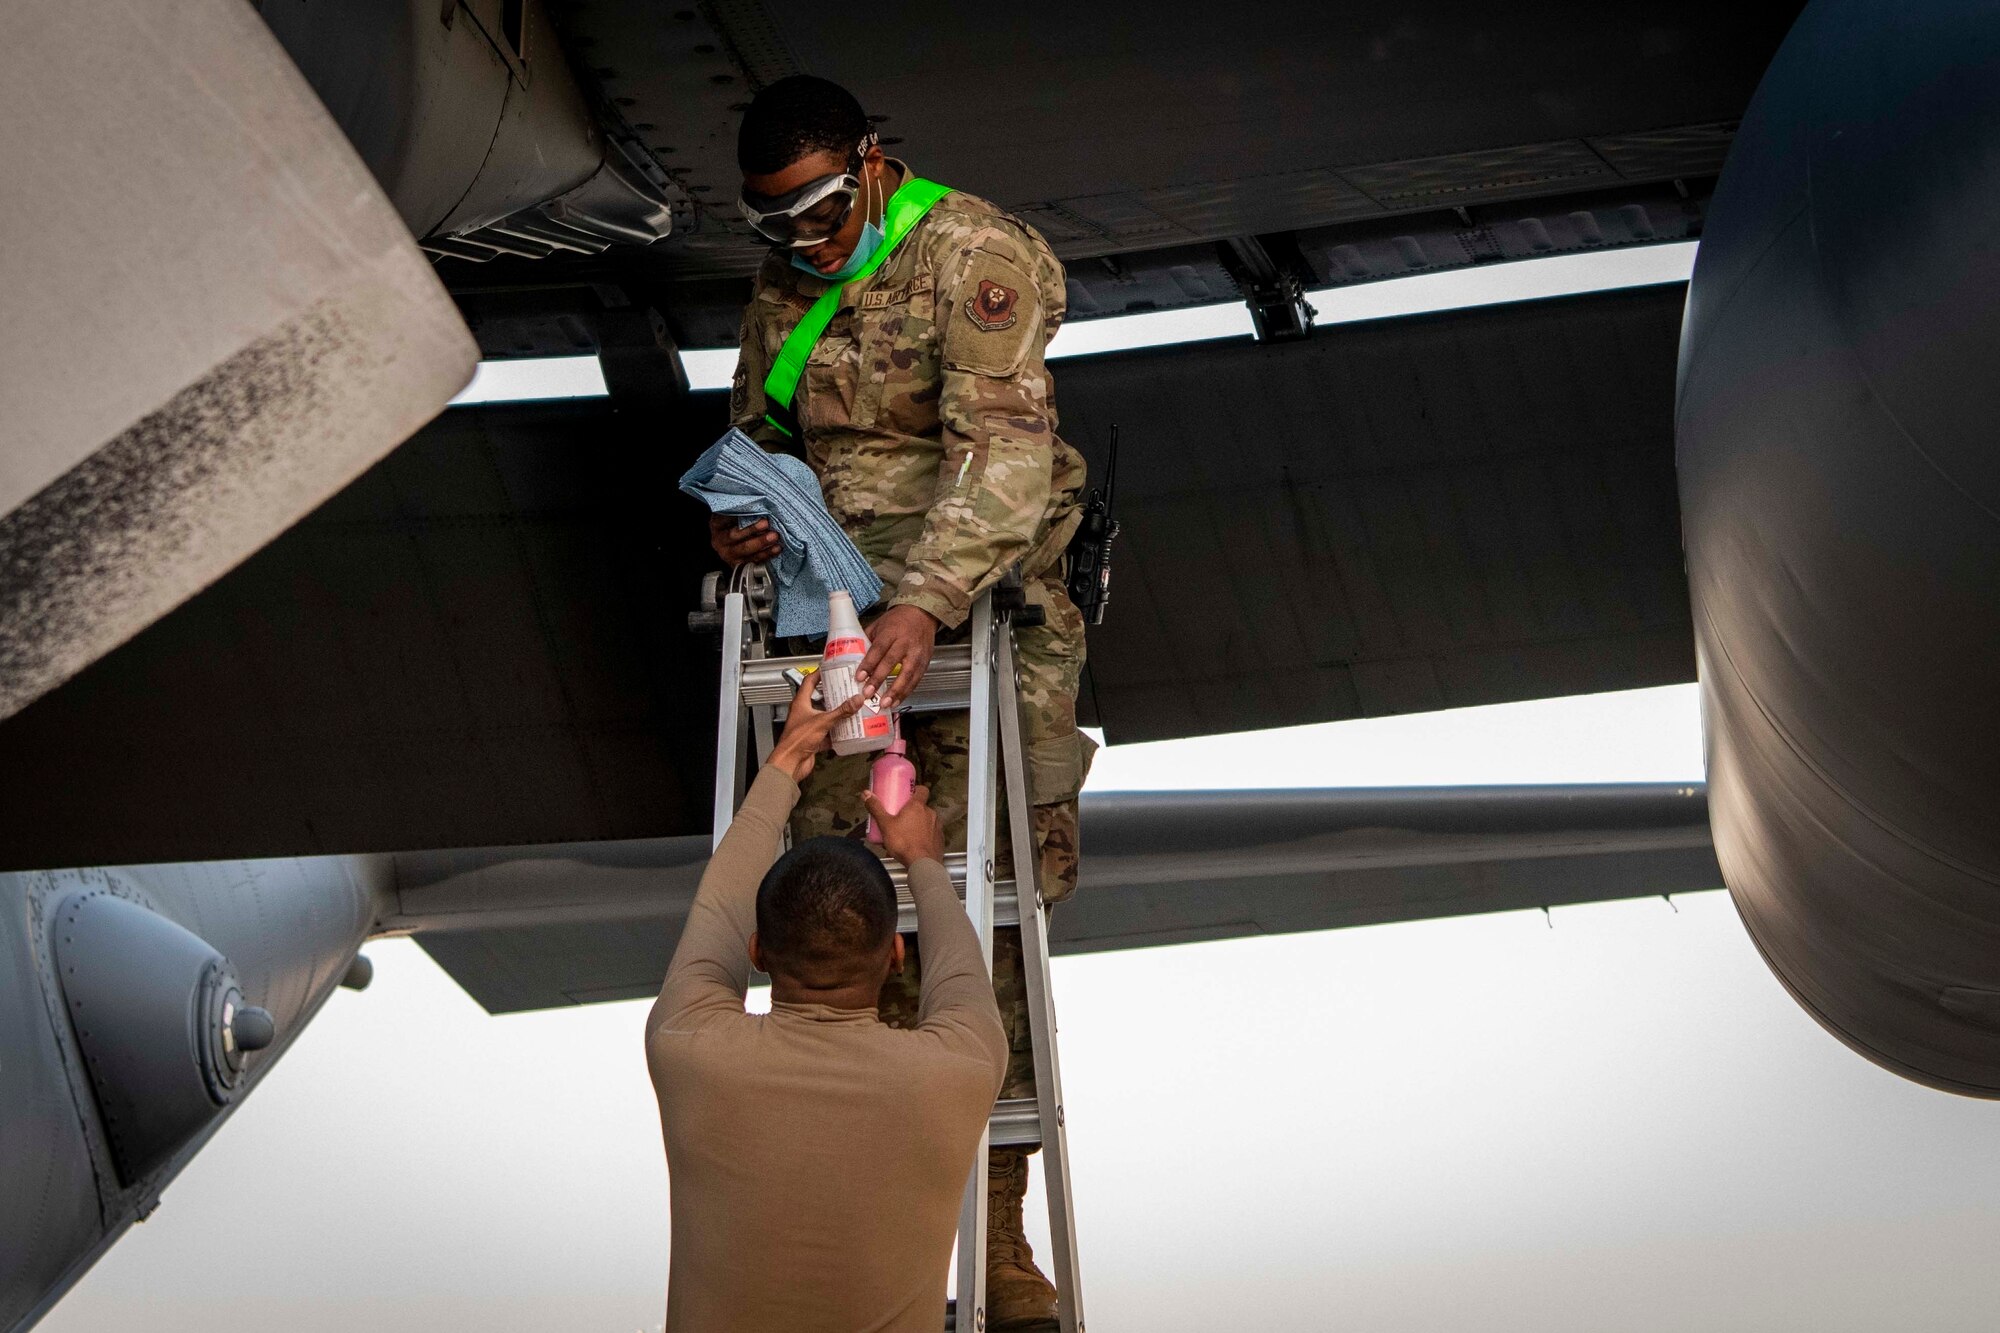 U.S. Air Force Senior Airman Henry Rivas, a fuels systems apprentice assigned to the 1st Special Operations Maintenance Squadron, hands equipment to U.S. Air Force Airman 1st Class Justin Thomas, a fuels systems apprentice assigned to the 1st SOMXS, before checking for a fuel leak on an MC-130H Combat Talon II at Hurlburt Field, Florida, April 5, 2021.